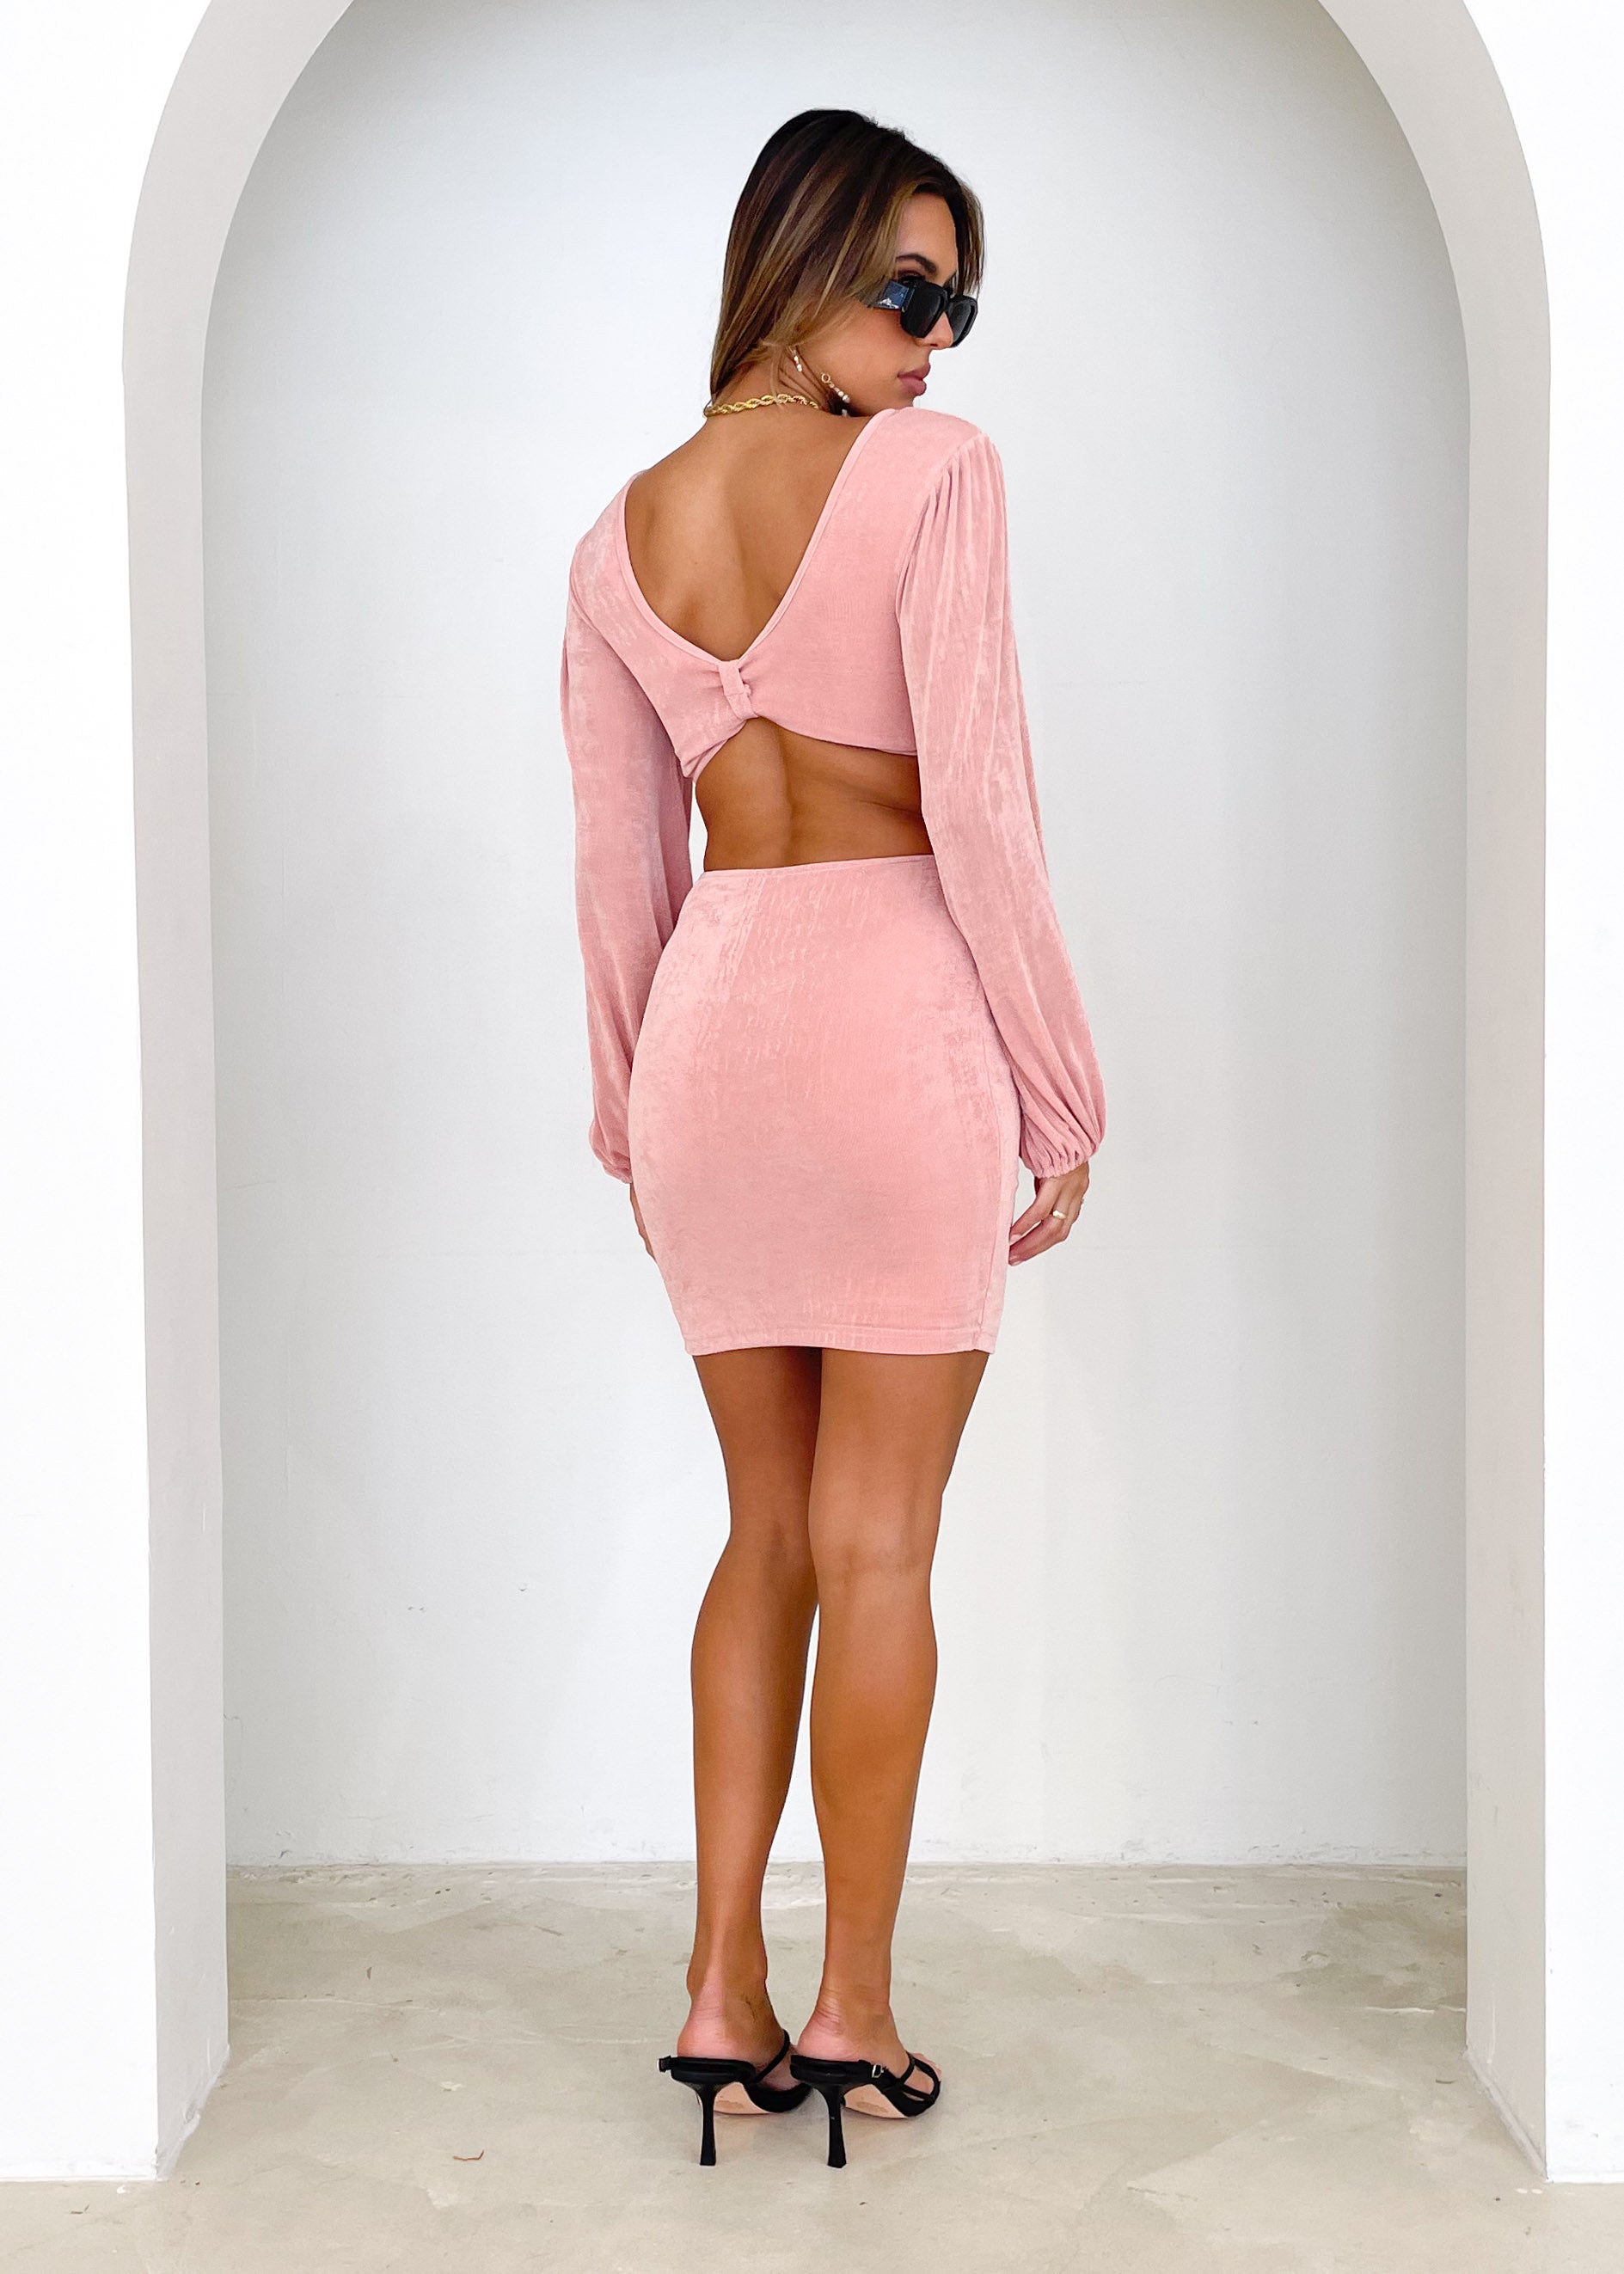 Brave Hearted Cut Out Dress - Blush